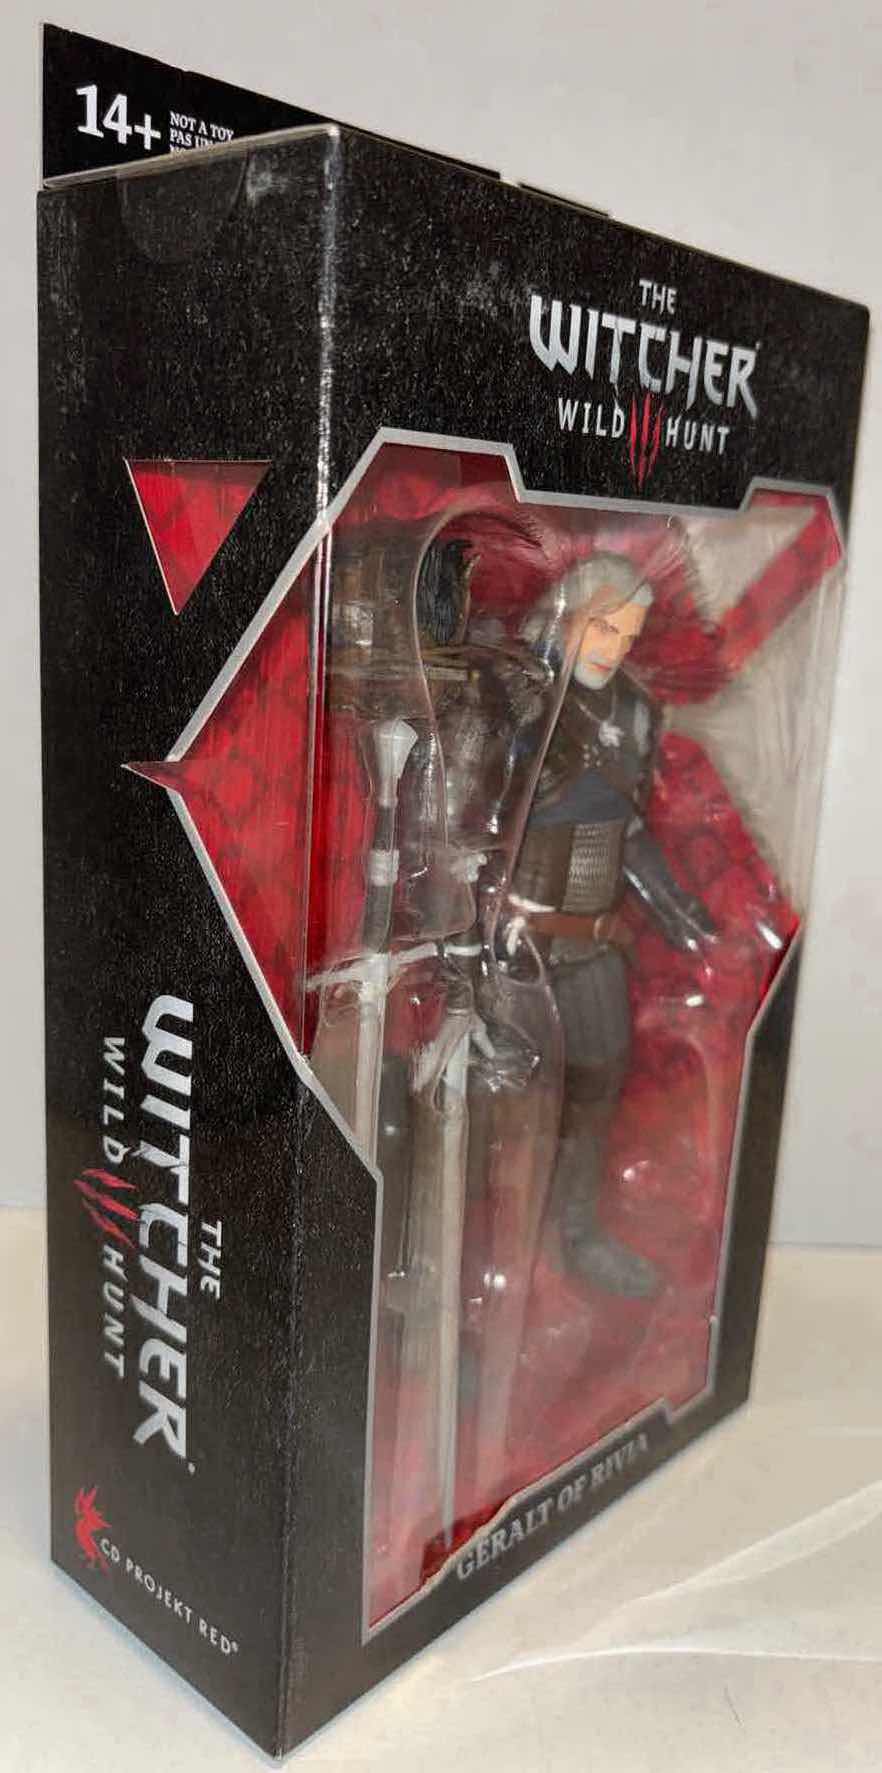 Photo 3 of NEW MCFARLANE TOYS THE WITCHER WILD HUNT “GERALT OF RIVIA” ACTION FIGURE & ACCESSORIES